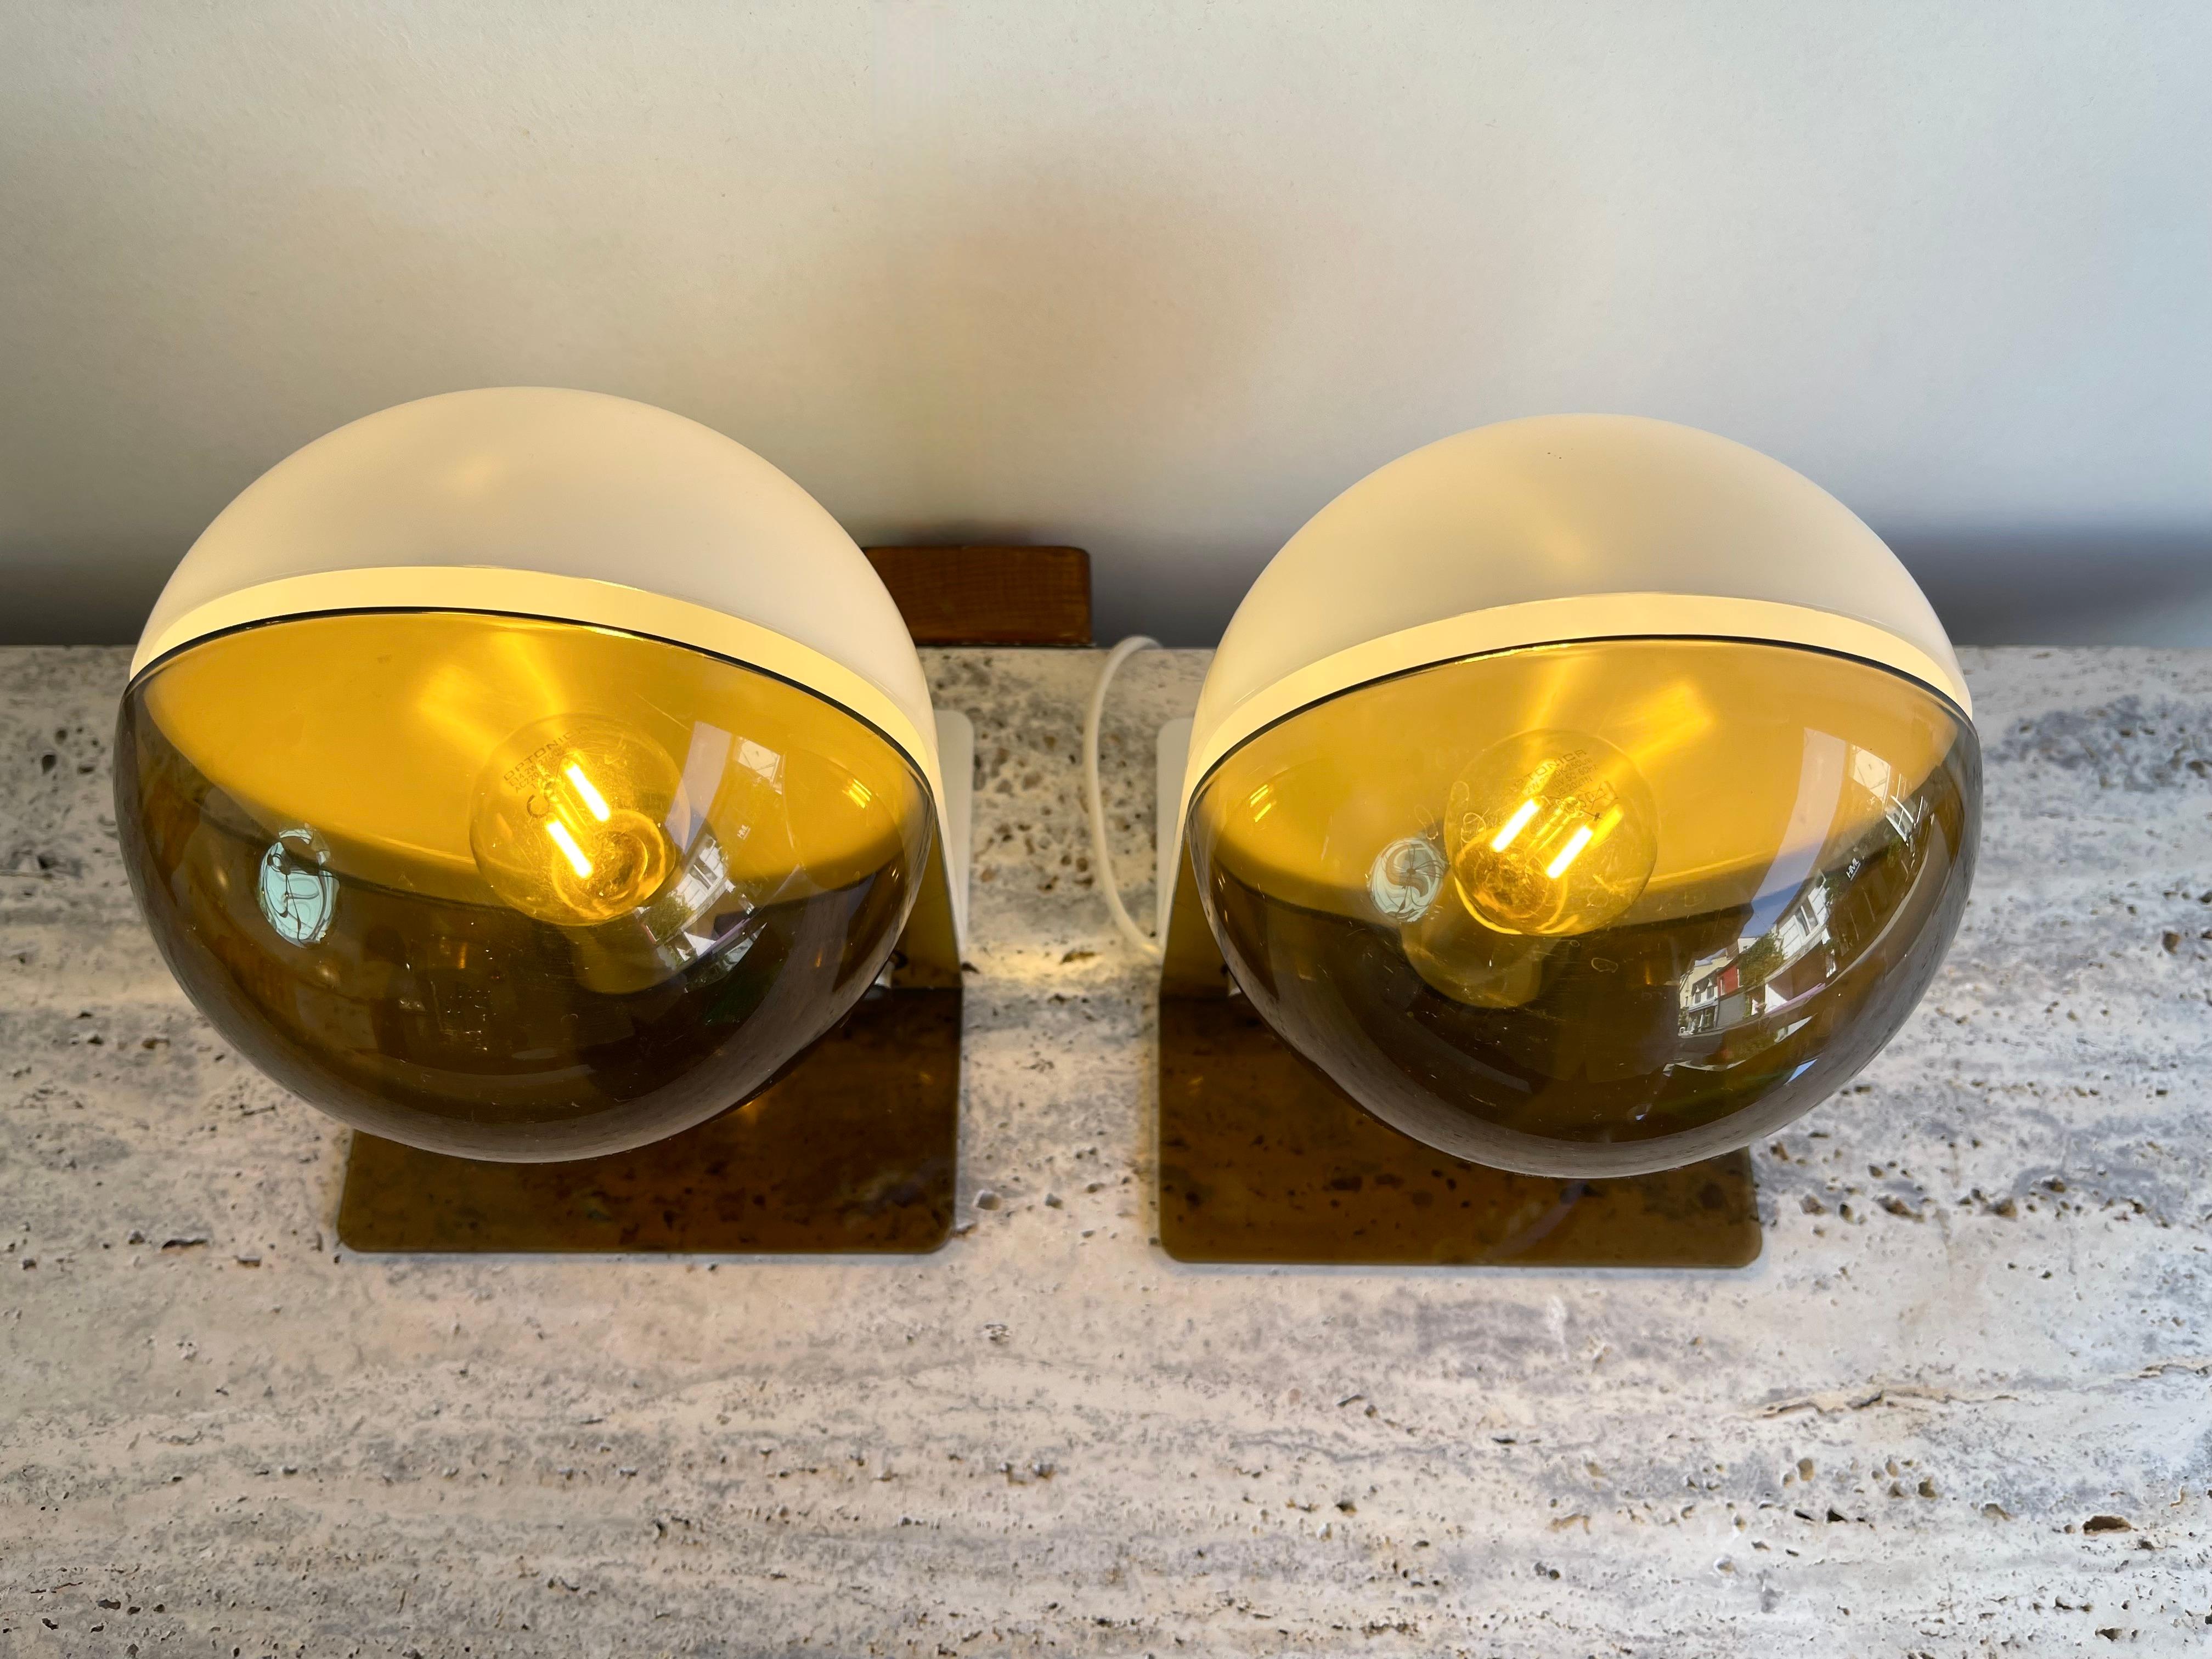 Pair of Lucite Lamps Sirio by Brazzoni Lampa for Harvey Guzzini. Italy, 1970s For Sale 3